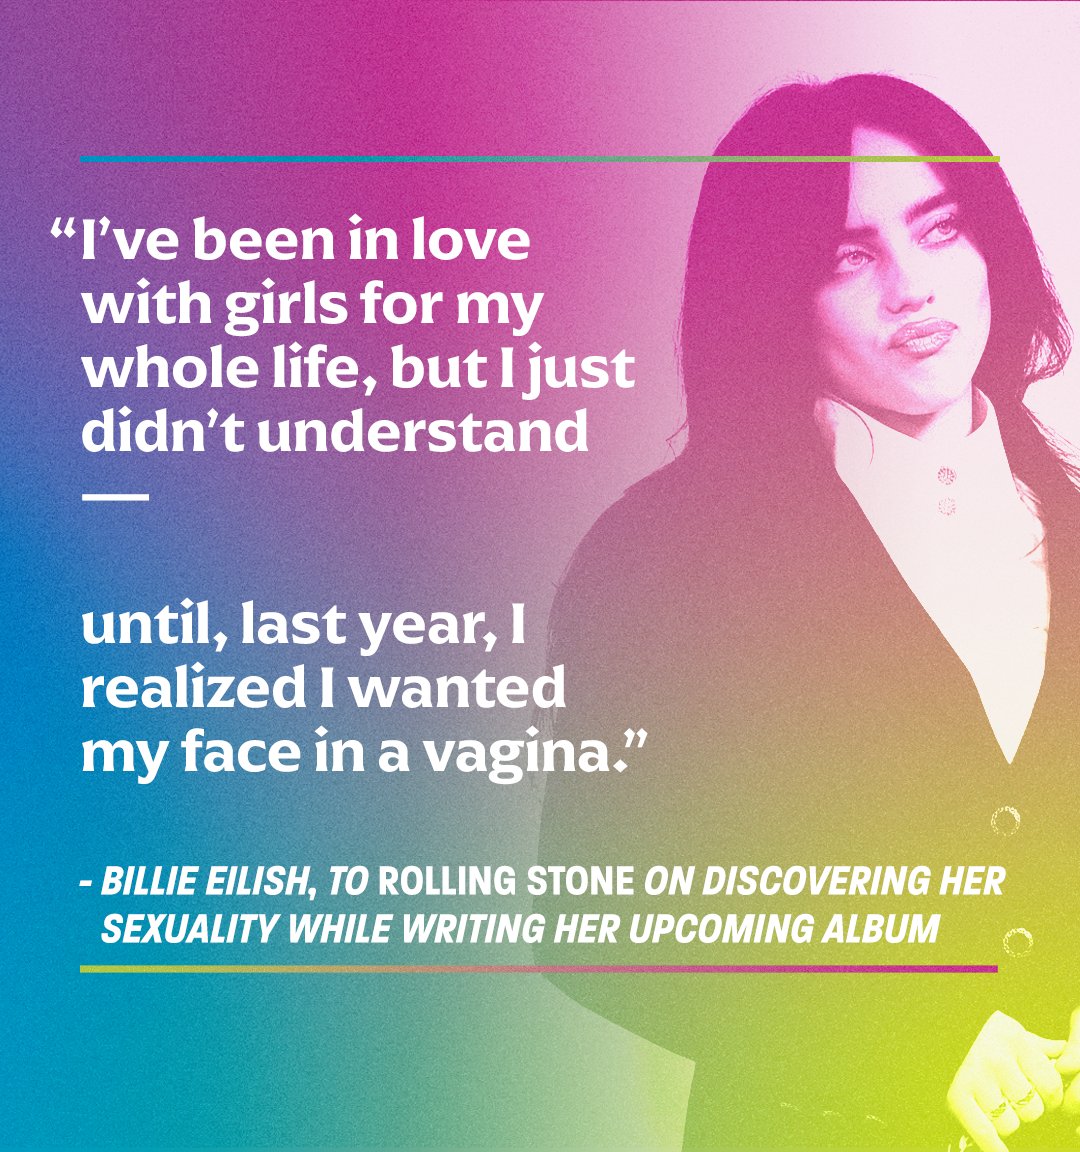 Everyone’s timeline is different for discovering their sexuality – and @billieeilish’s just happened to occur while writing an upcoming song, “Lunch”! 🍴